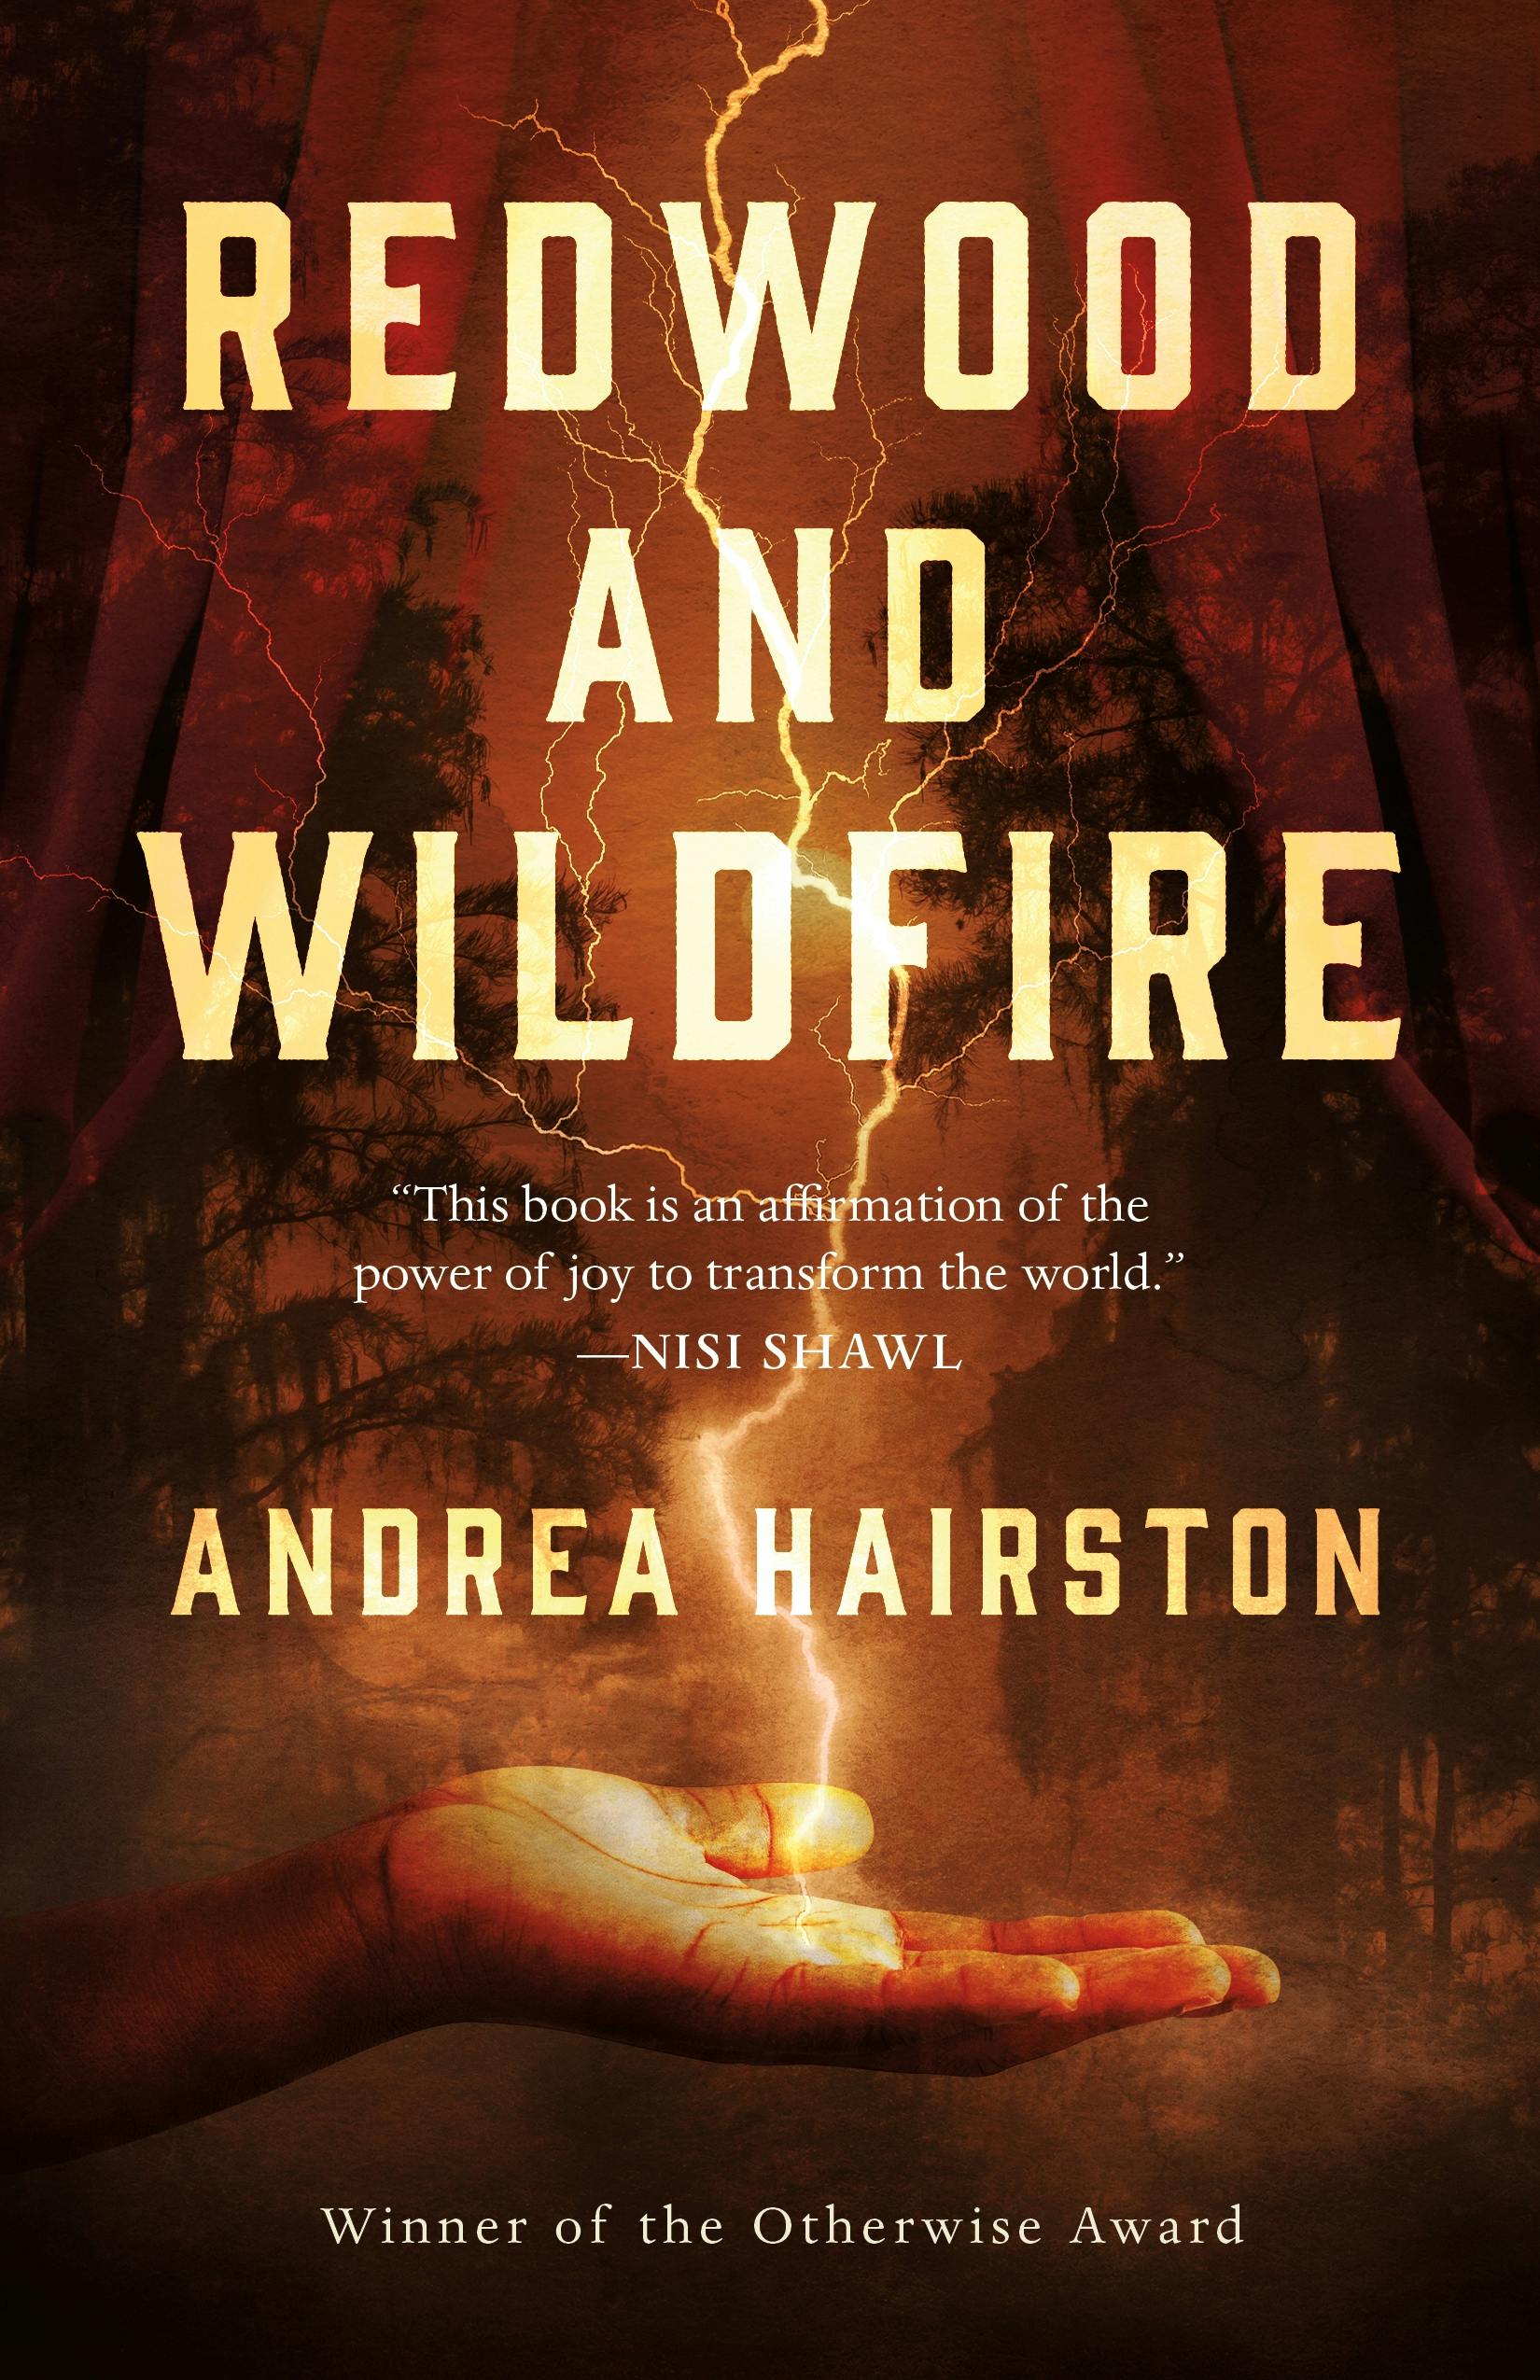 Cover for the book titled as: Redwood and Wildfire